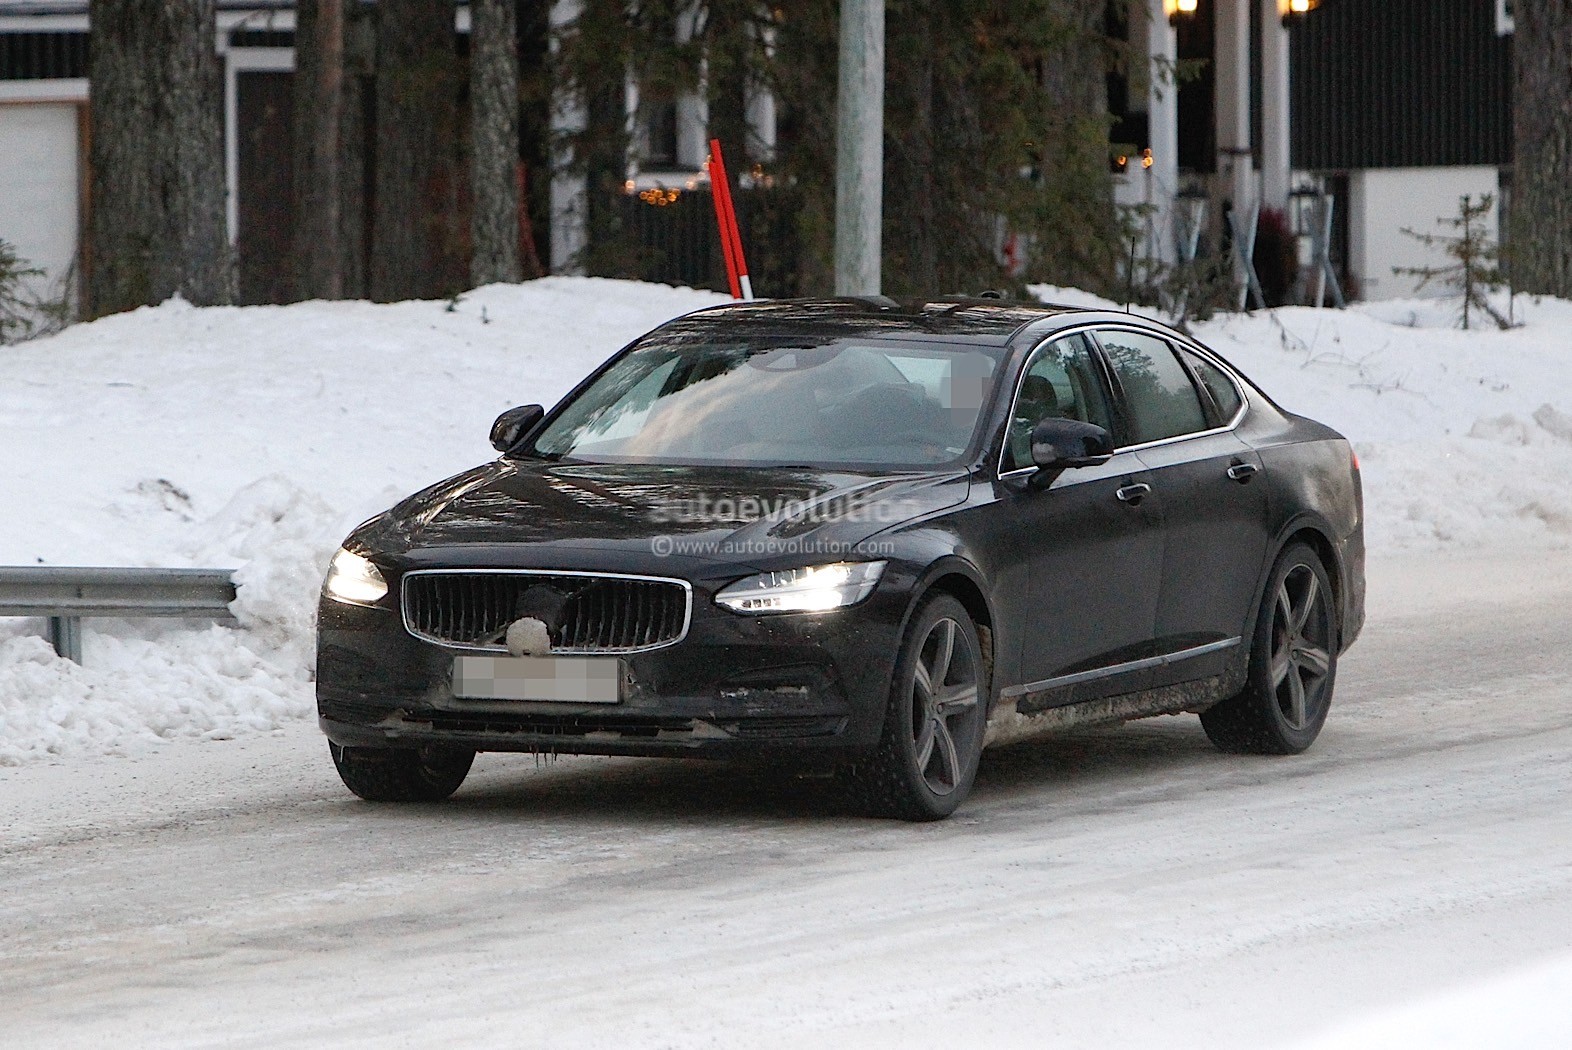 https://s1.cdn.autoevolution.com/images/news/gallery/2021-volvo-s90-and-v90-facelift-wear-useless-camouflage-winter-testing_12.jpg